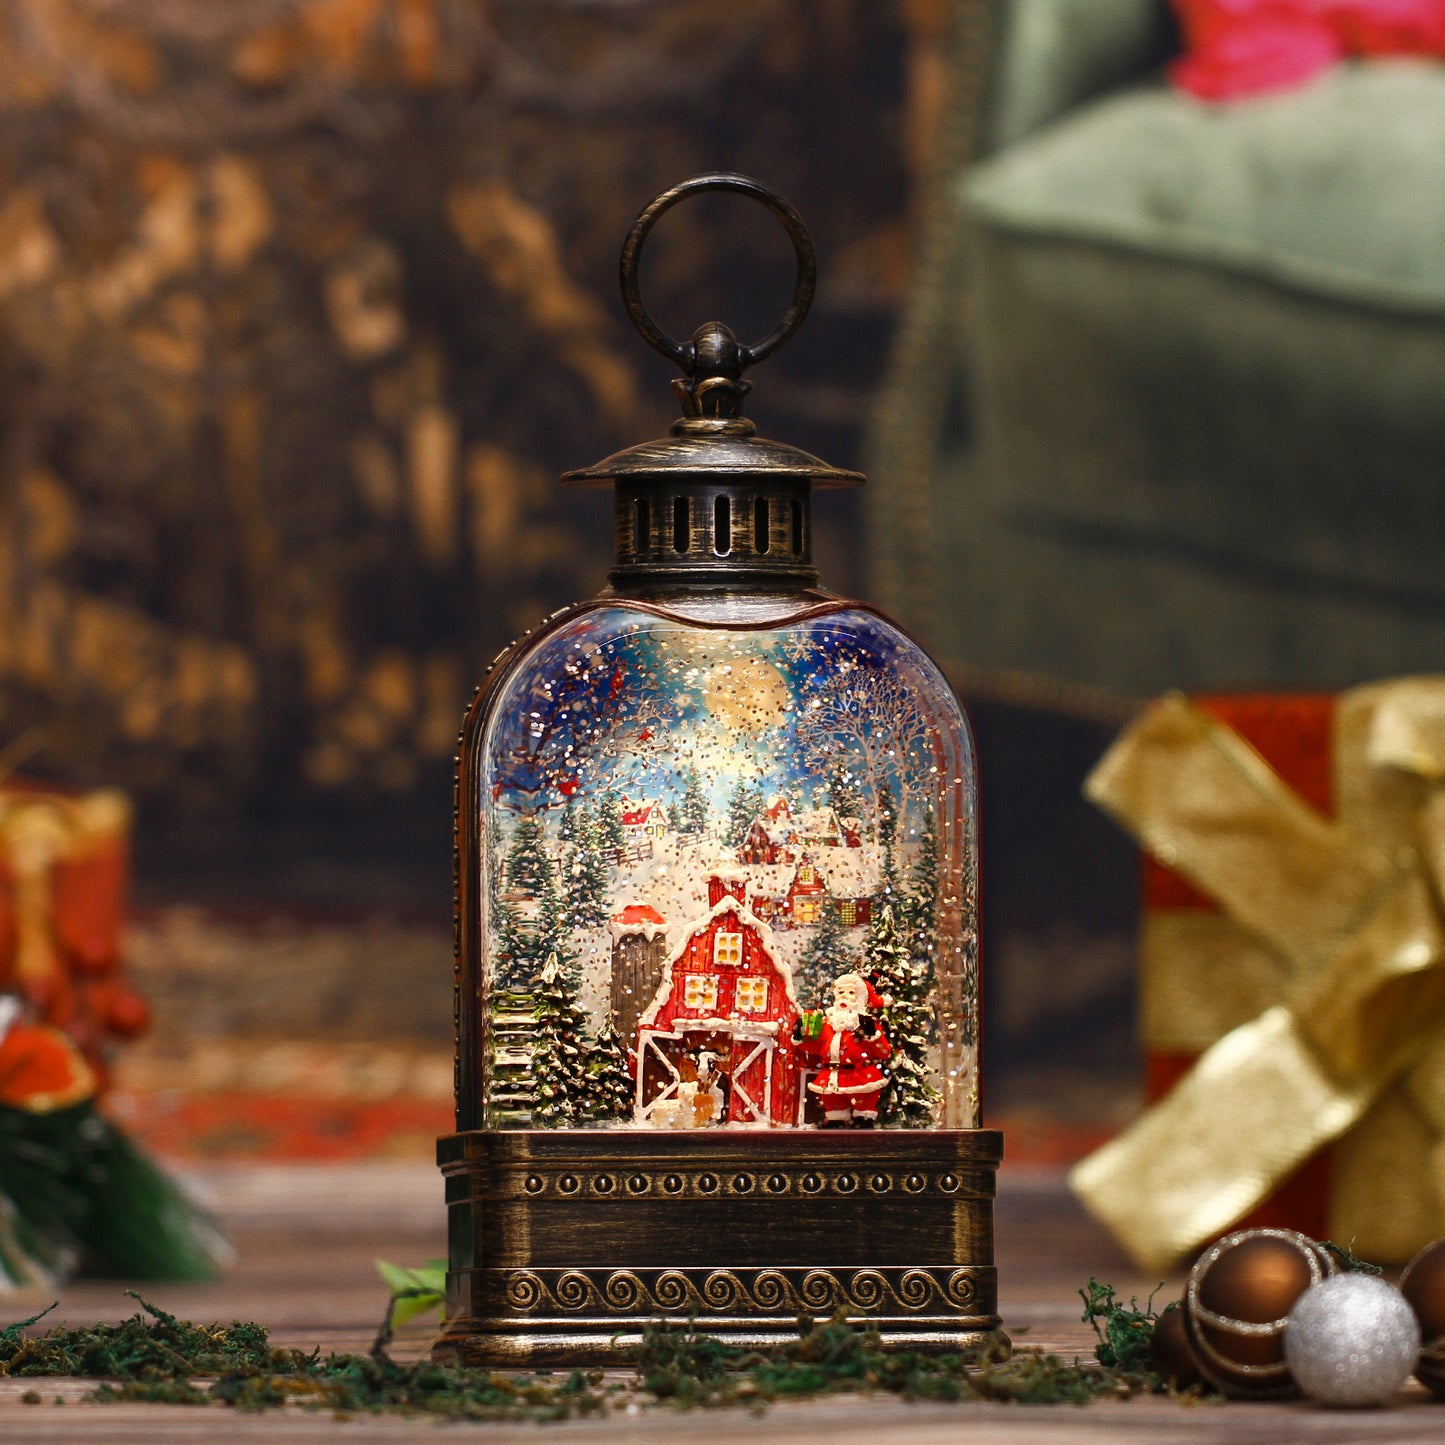 11 inch Christmas Snow Globe Water Lantern, Musical Glittering Xmas Water Globe Church Lantern with 6 Hour Timer(Santa Claus Giving gifts in Snow Village)